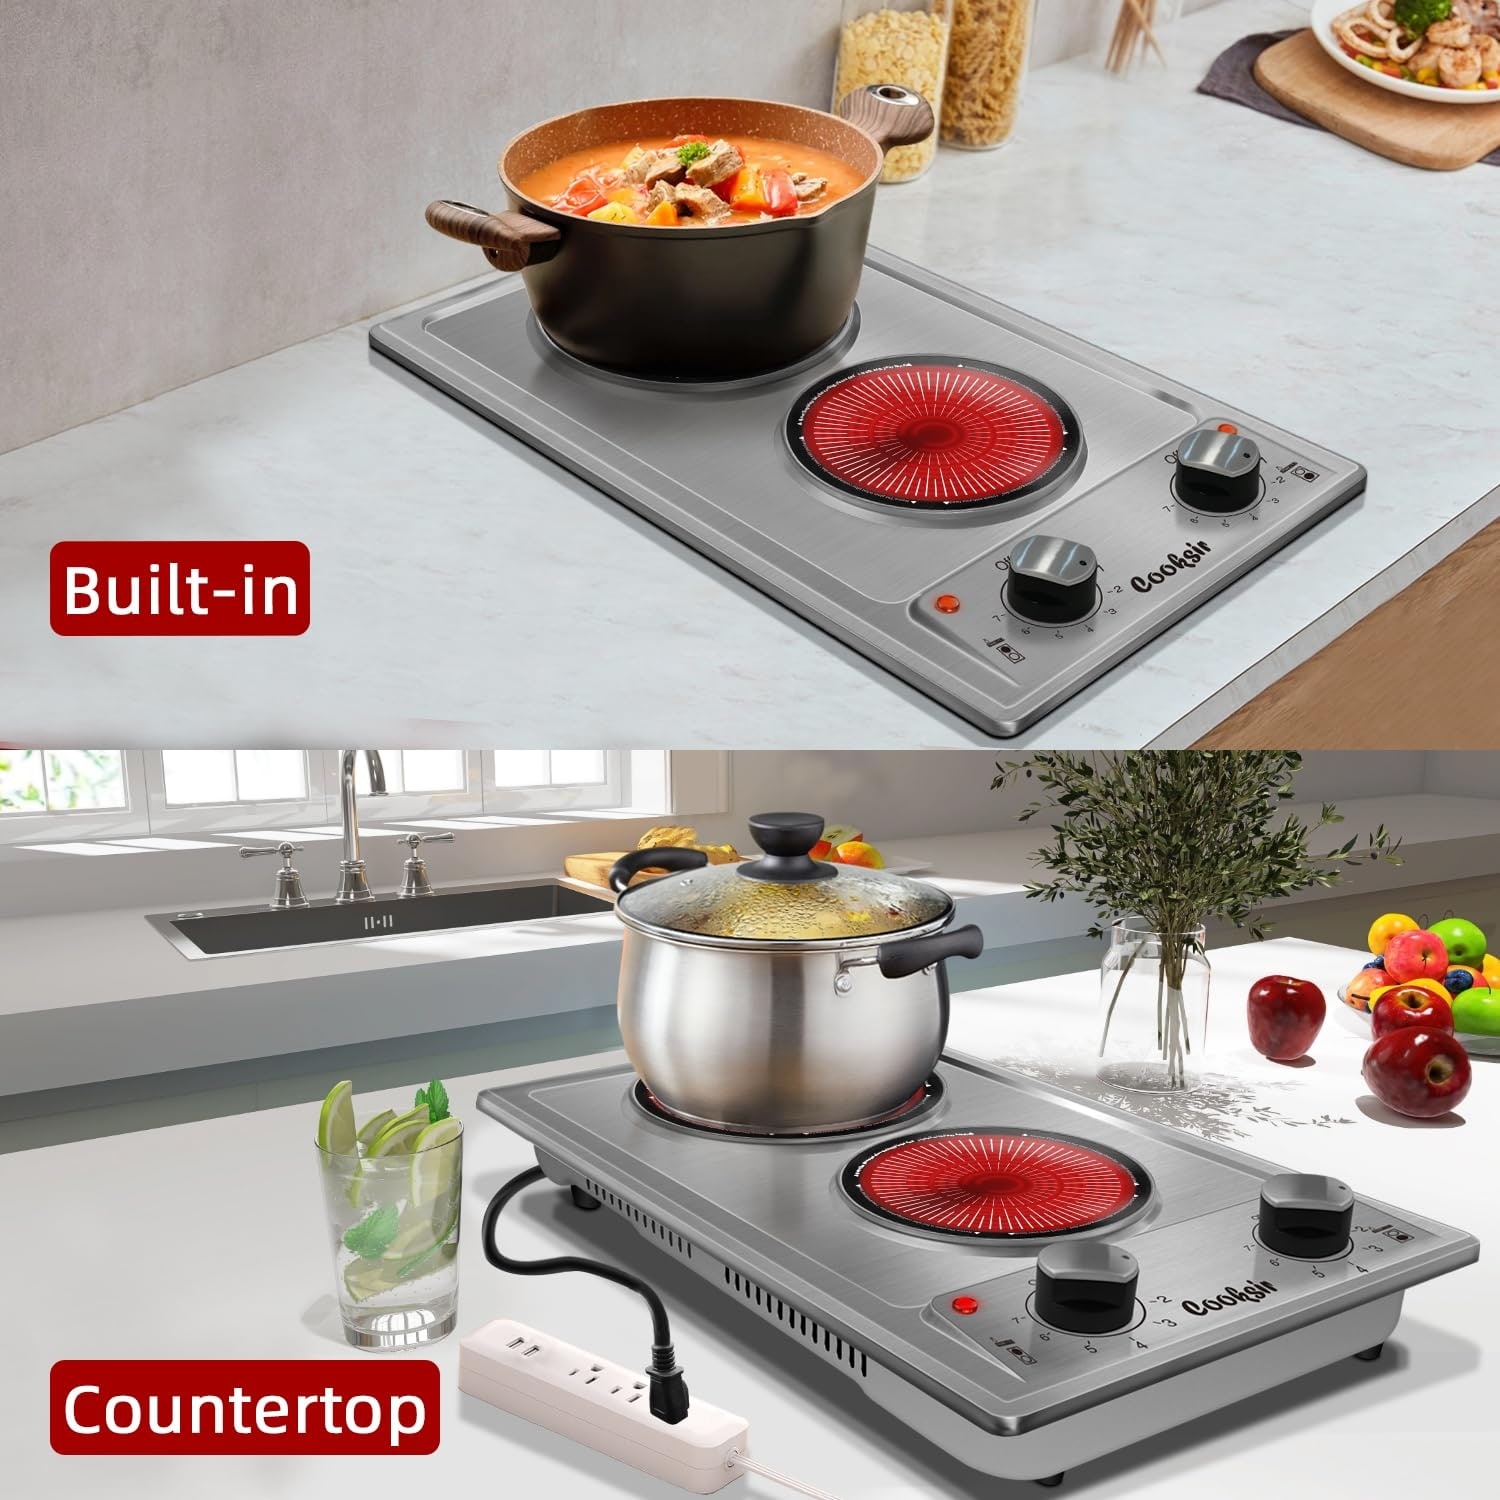 https://ak1.ostkcdn.com/images/products/is/images/direct/b497f98b809f34d2cbe07ef291276a856d7f224e/Electric-Cooktop-2-Burner%2C-Plug-in-Electric-Stove-Top-Stainless-Steel-110V-Ceramic-Cooktop-with-2-Knob-Control.jpg